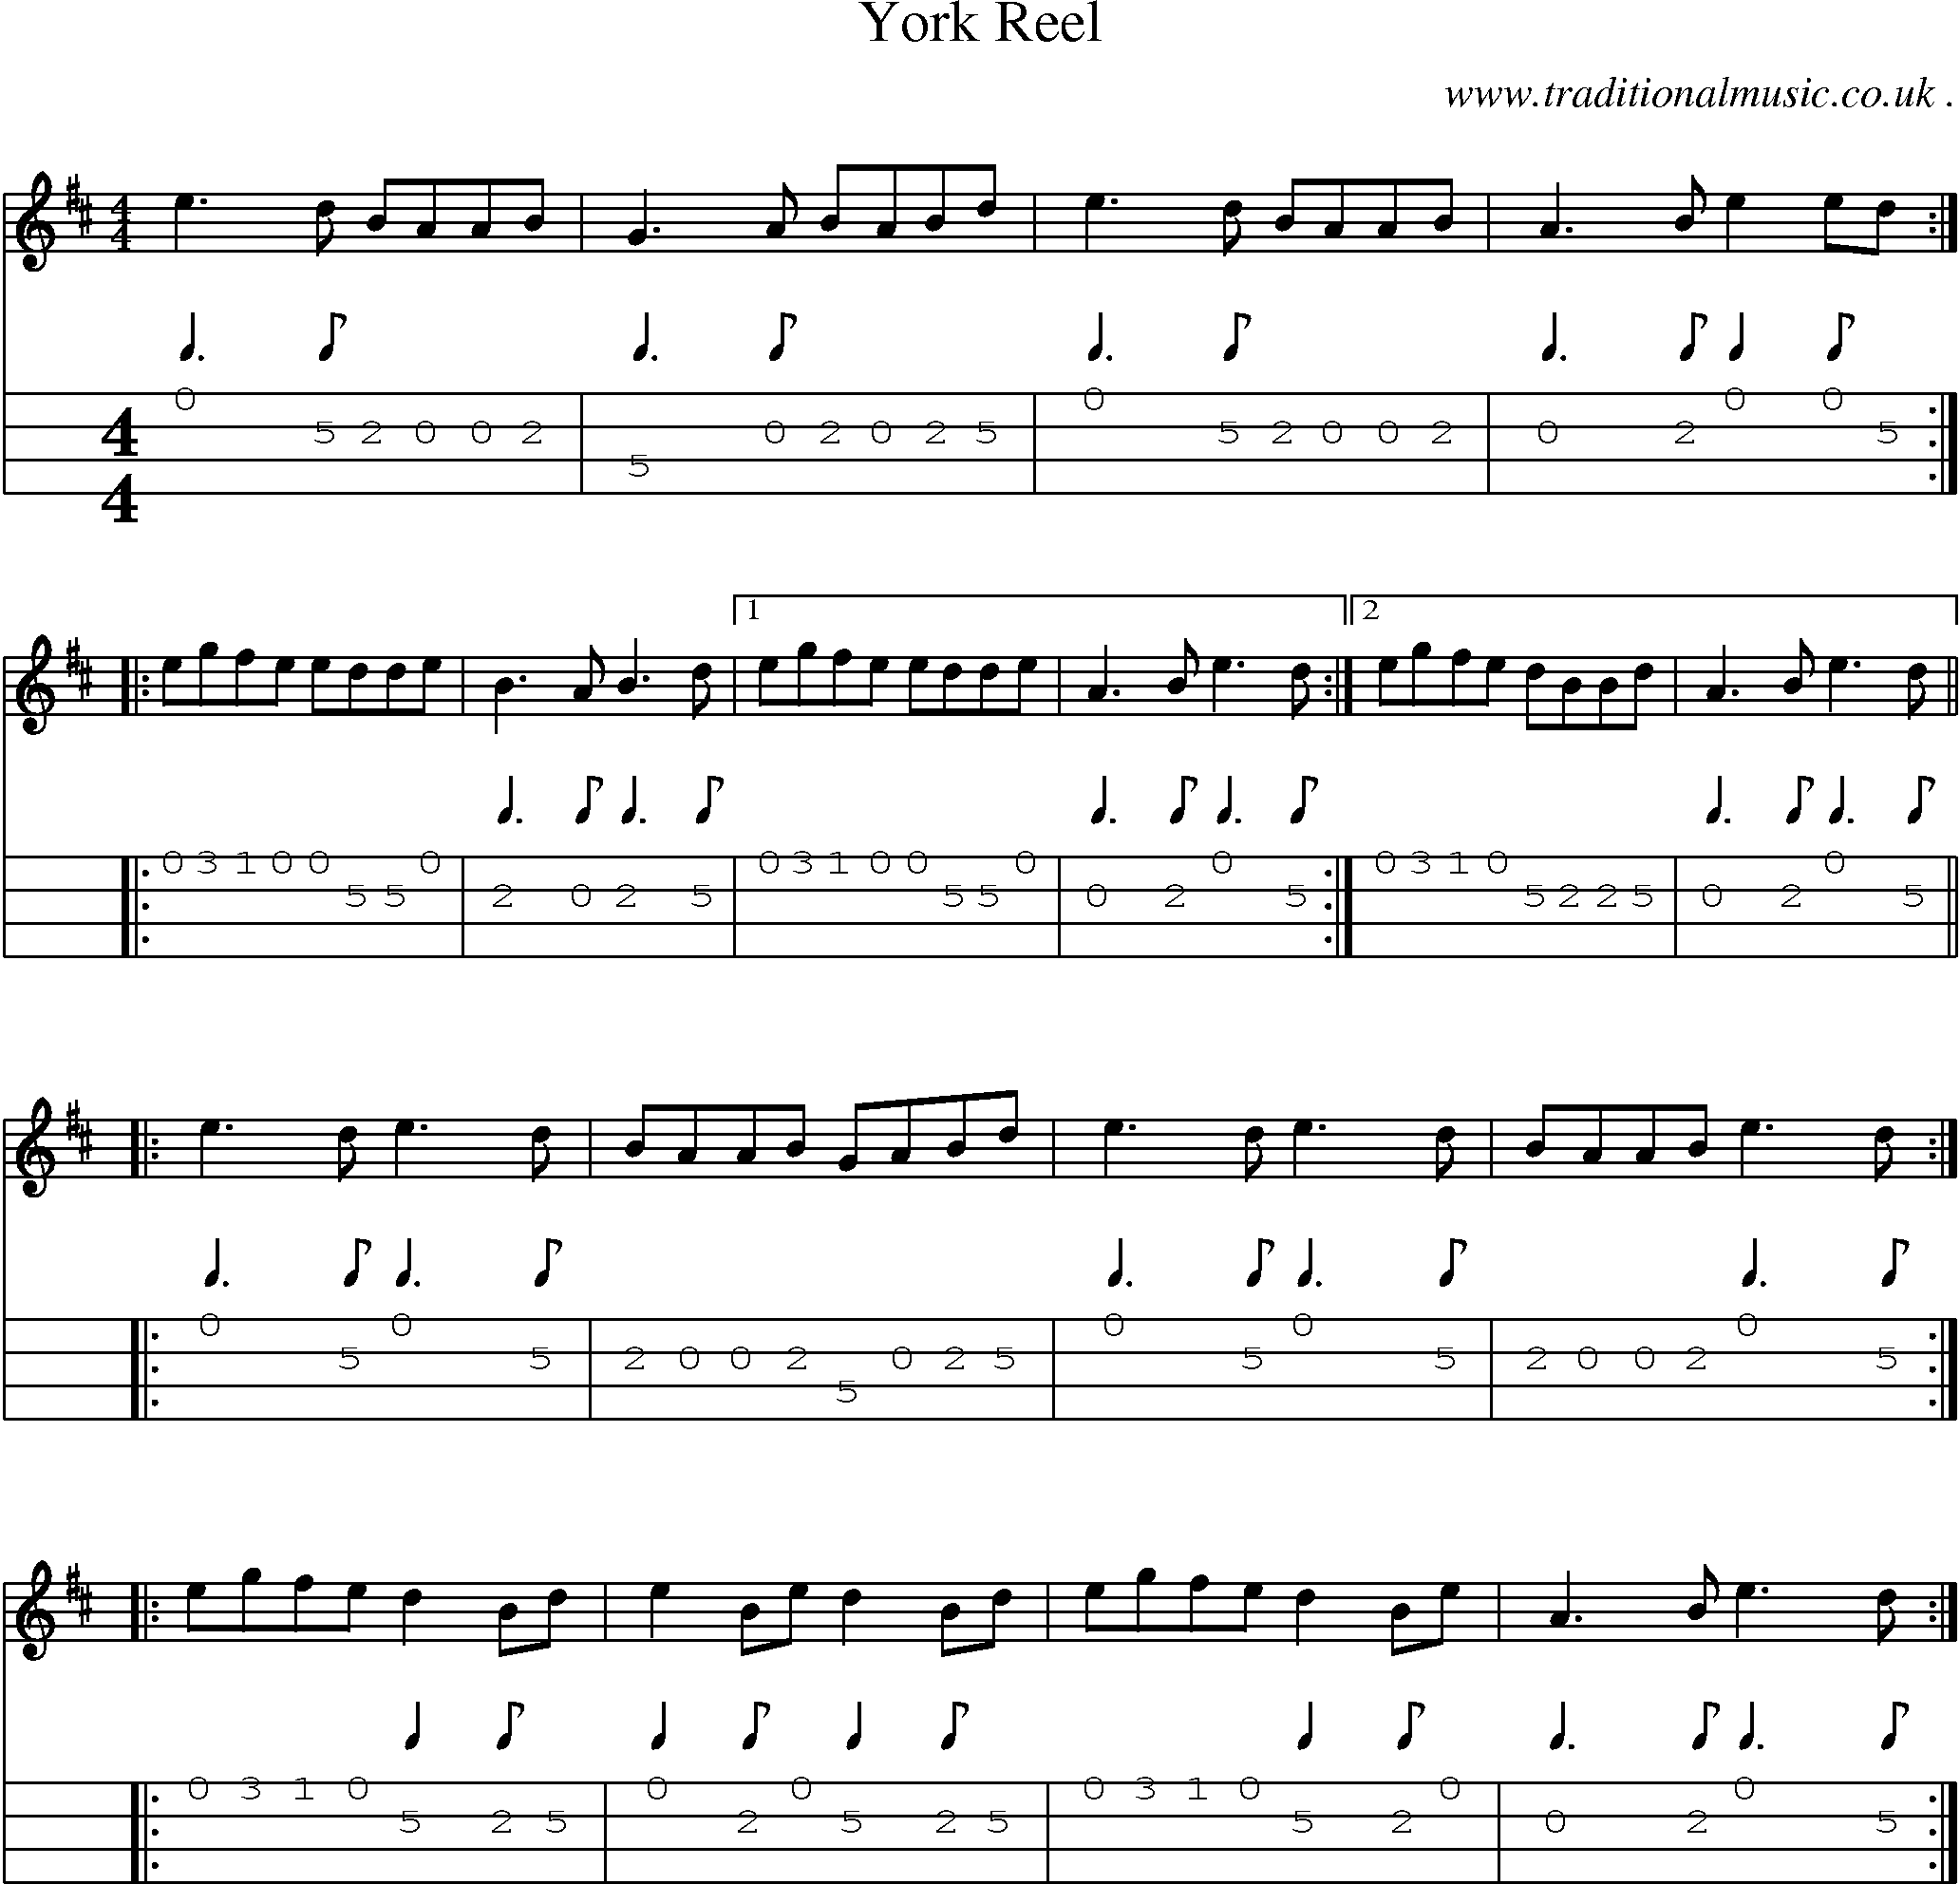 Sheet-Music and Mandolin Tabs for York Reel